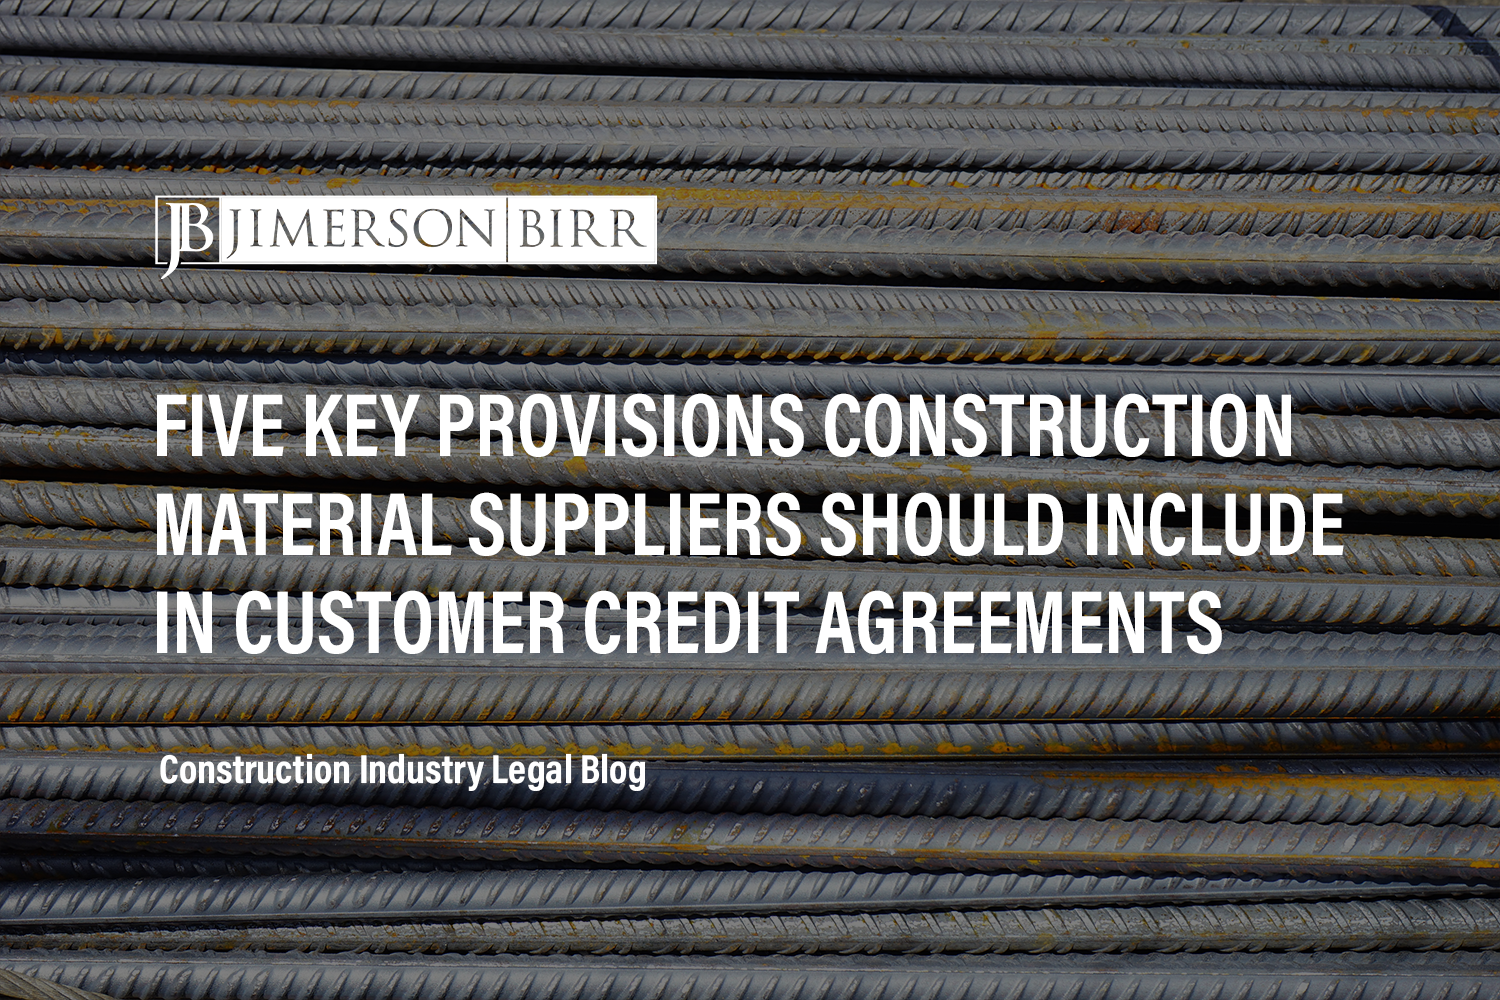 Five Key Provisions Construction Material Suppliers Should Include in Customer Credit Agreements